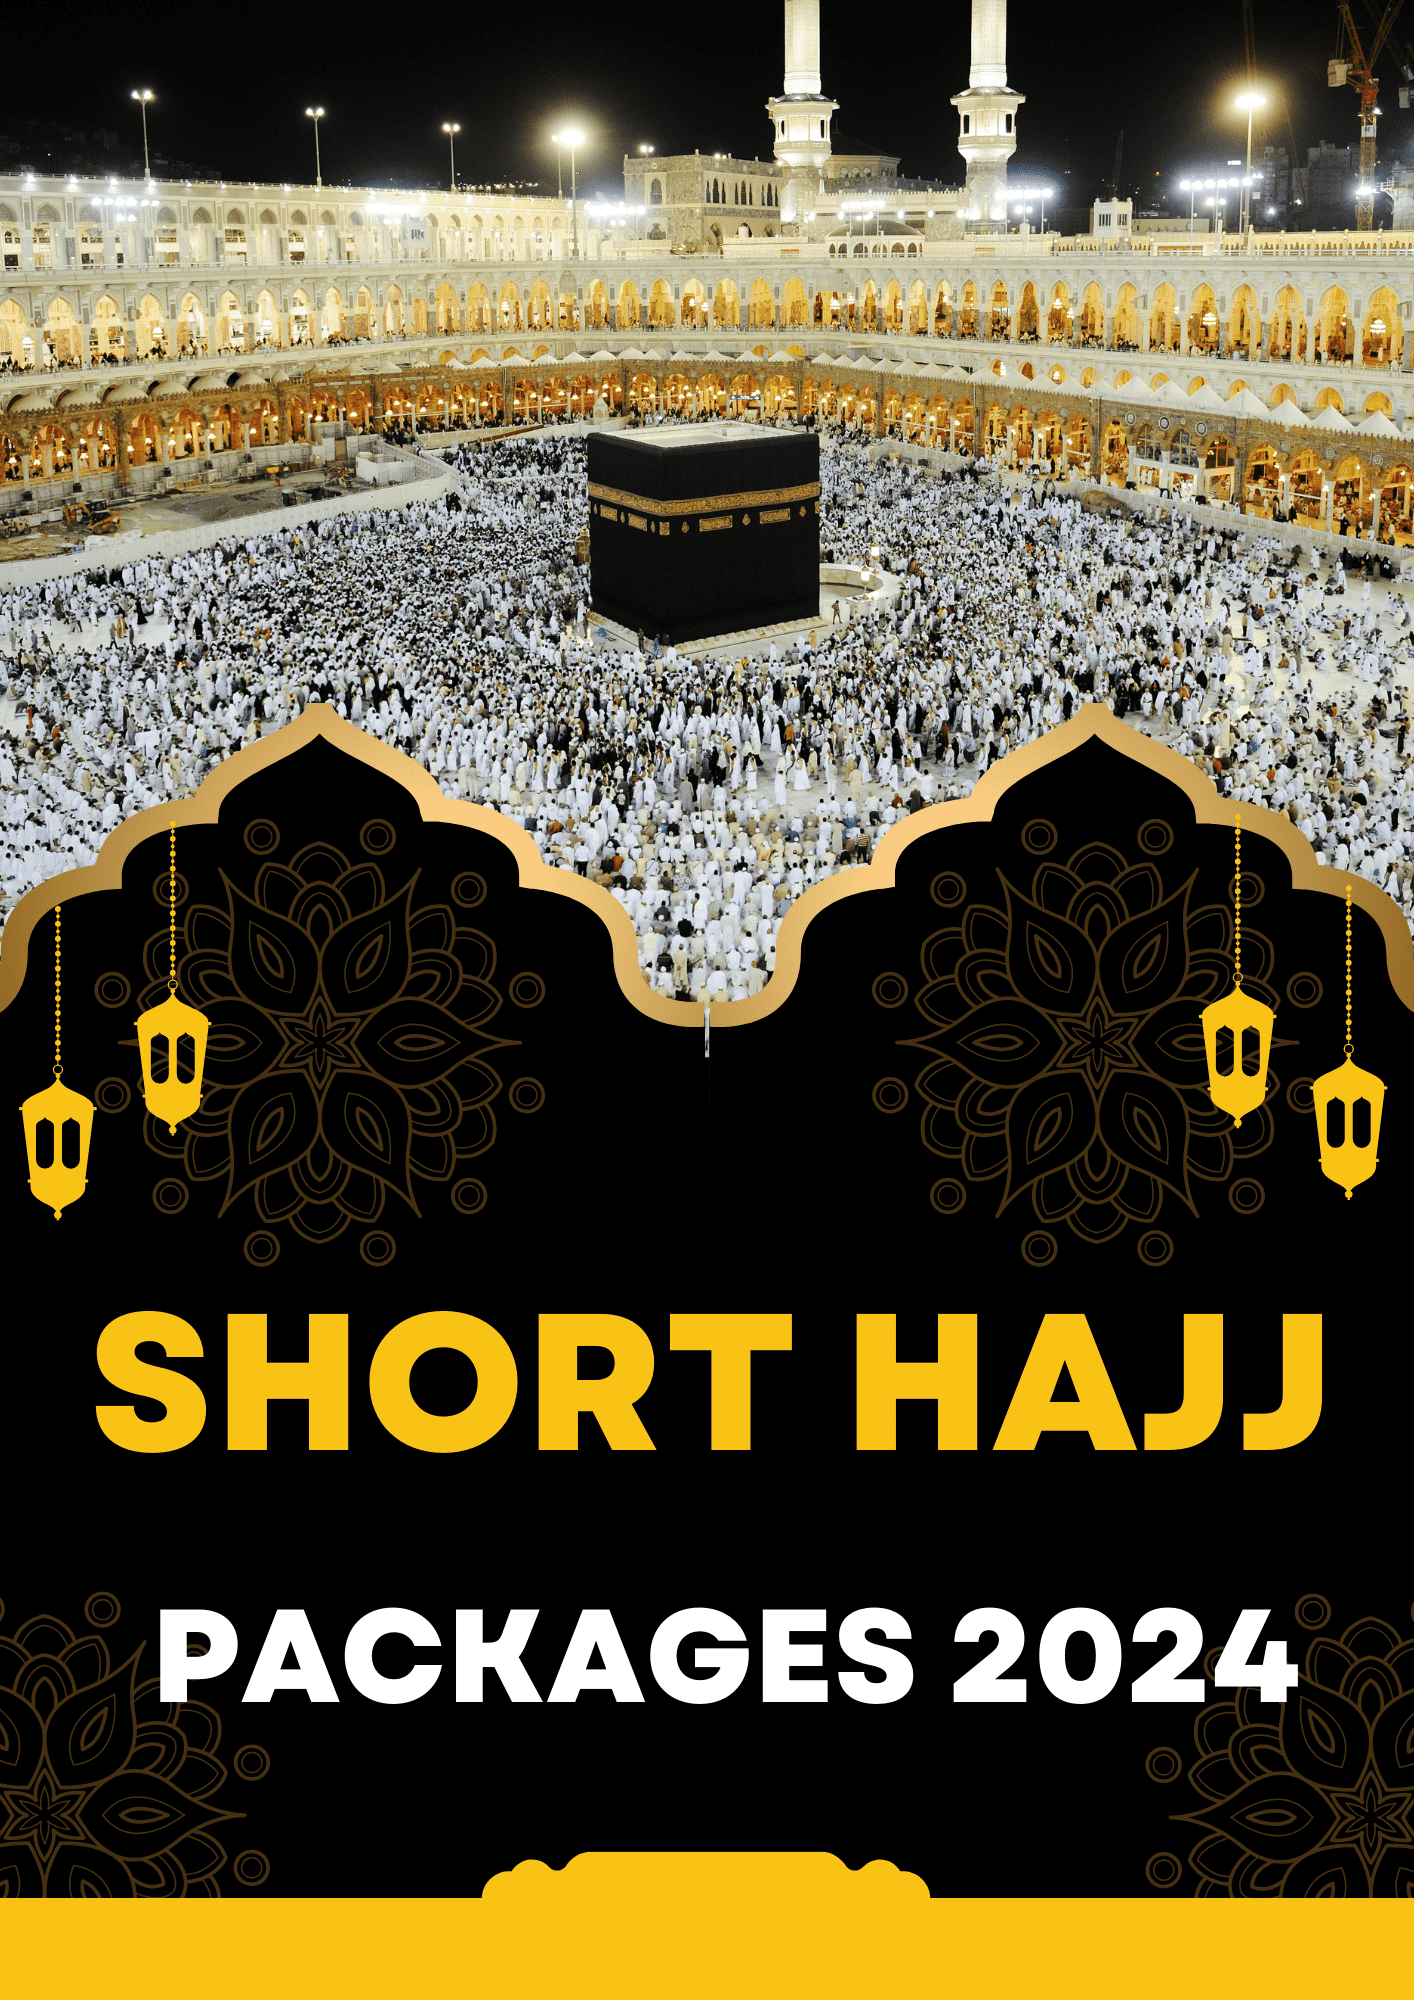 hajj packages 2024